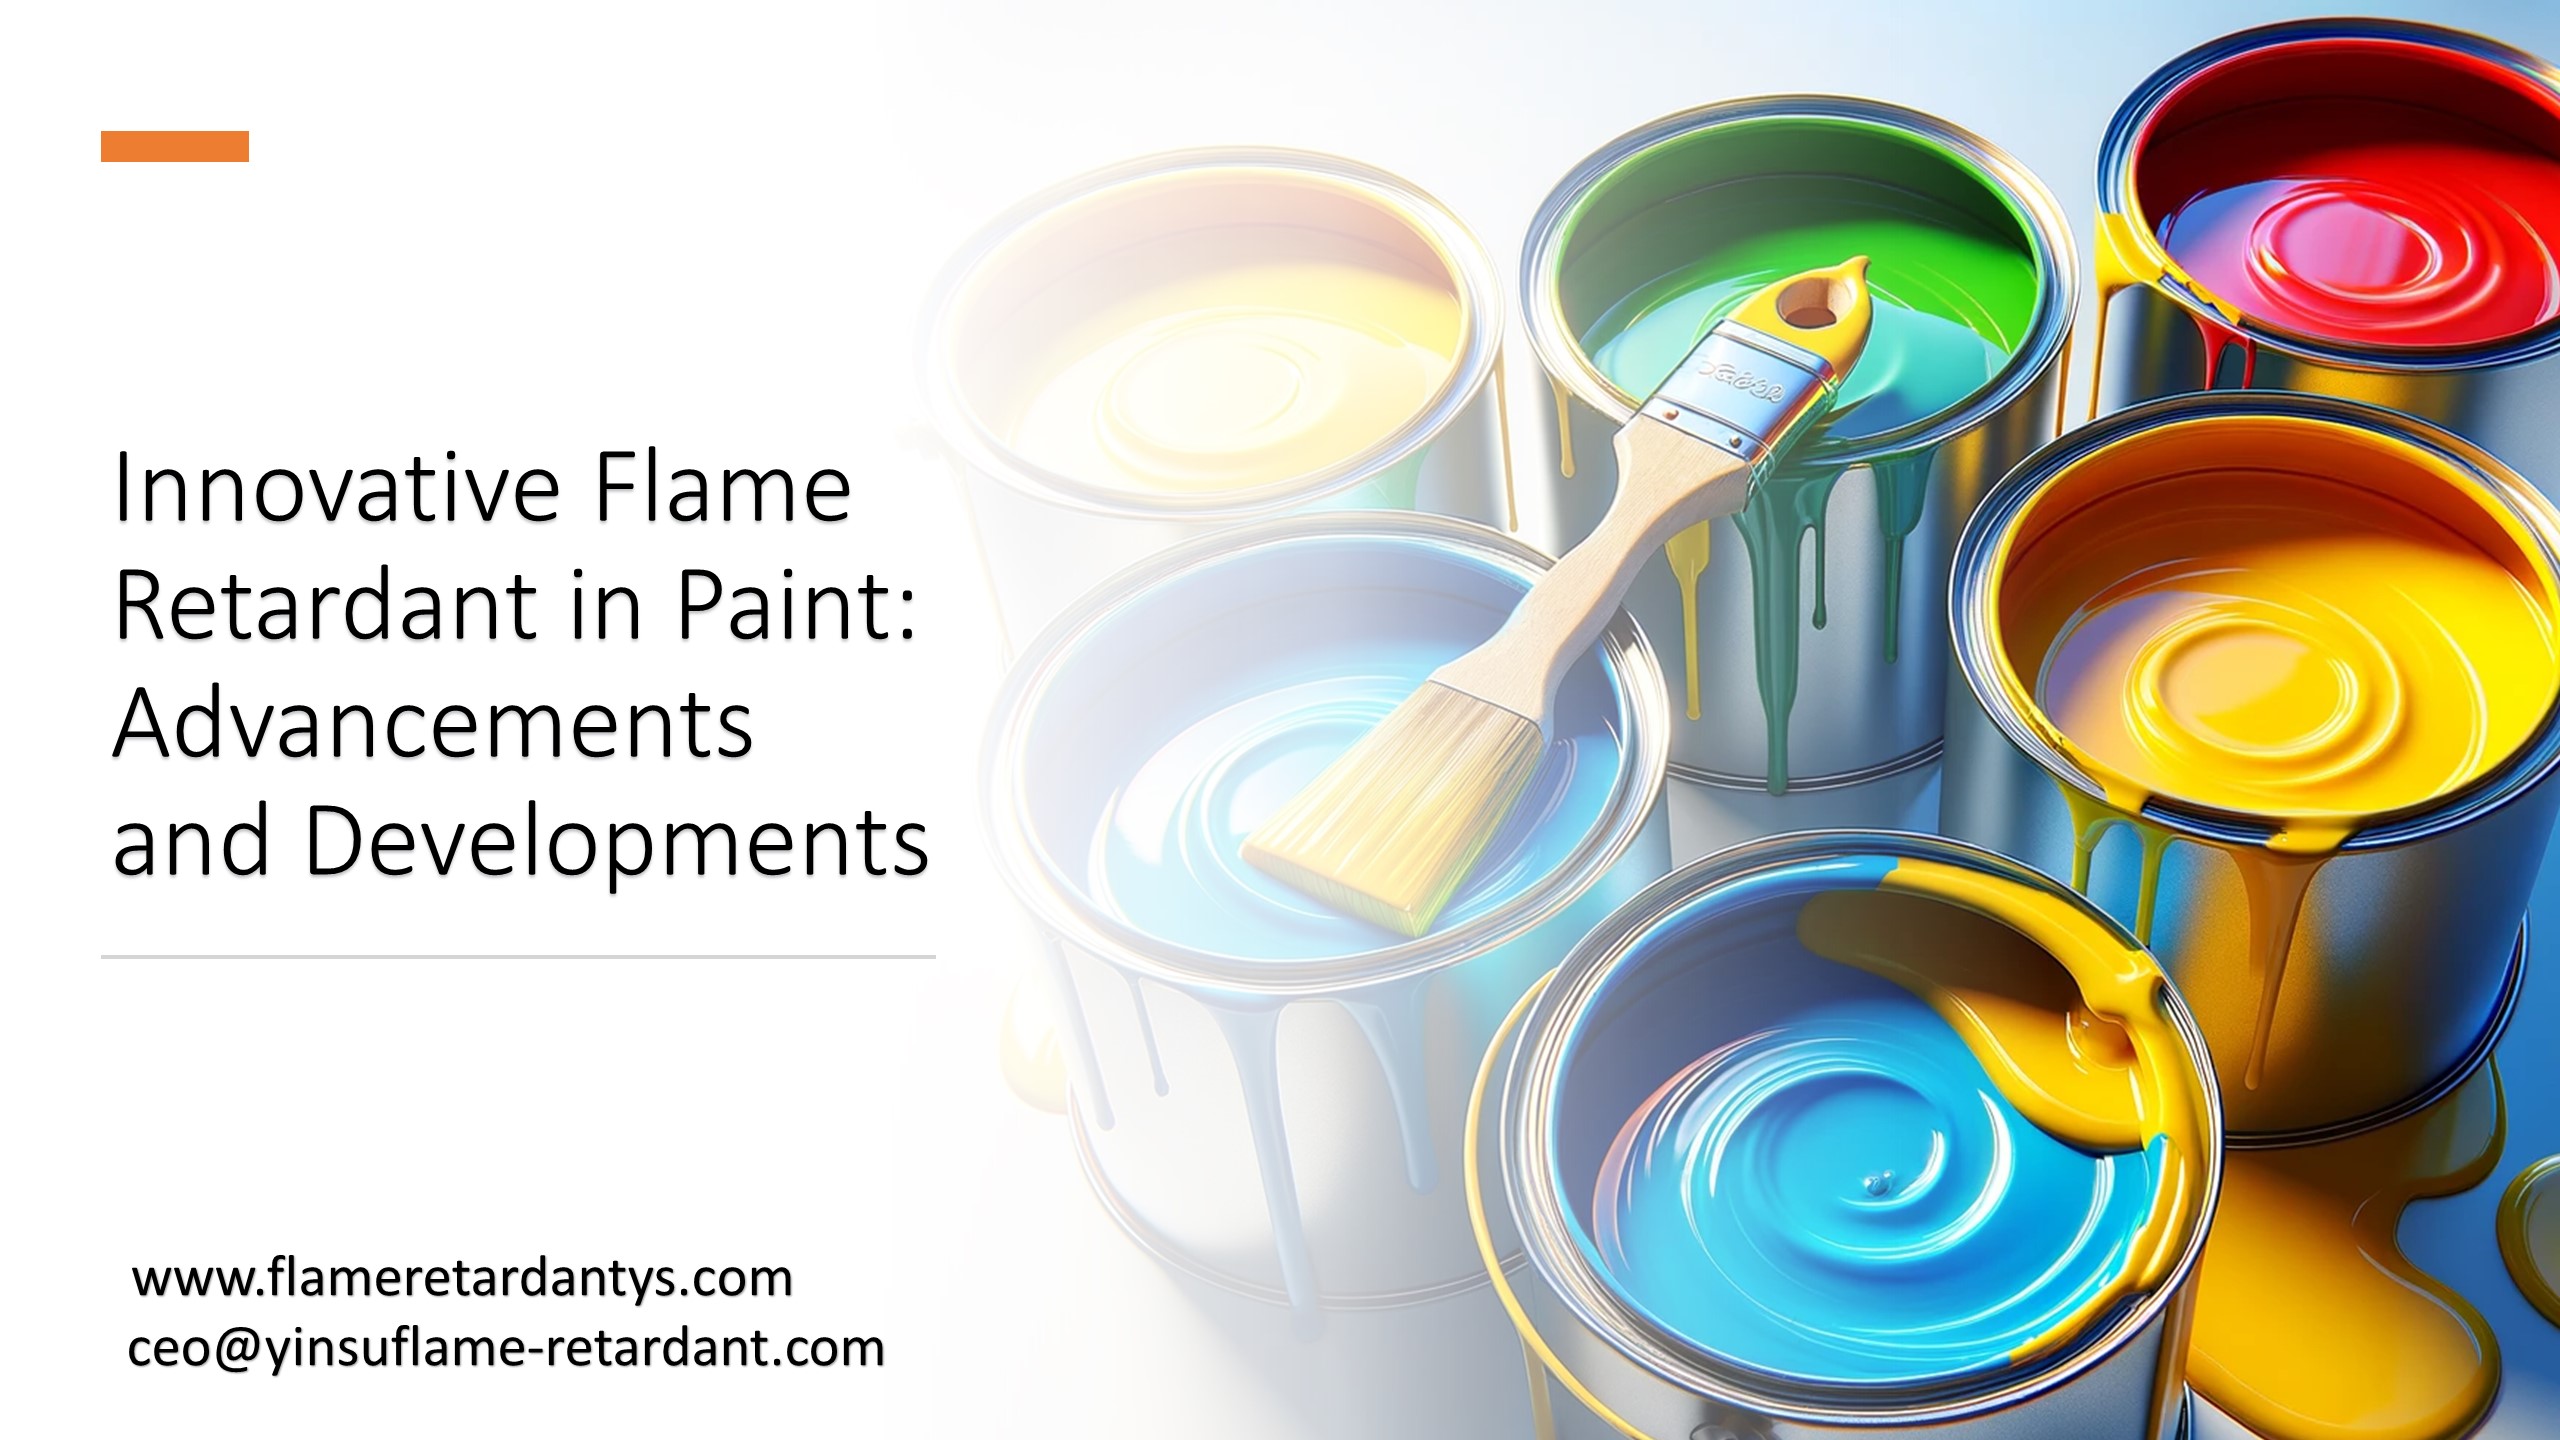 Innovative Flame Retardant in Paint Advancements and Developments